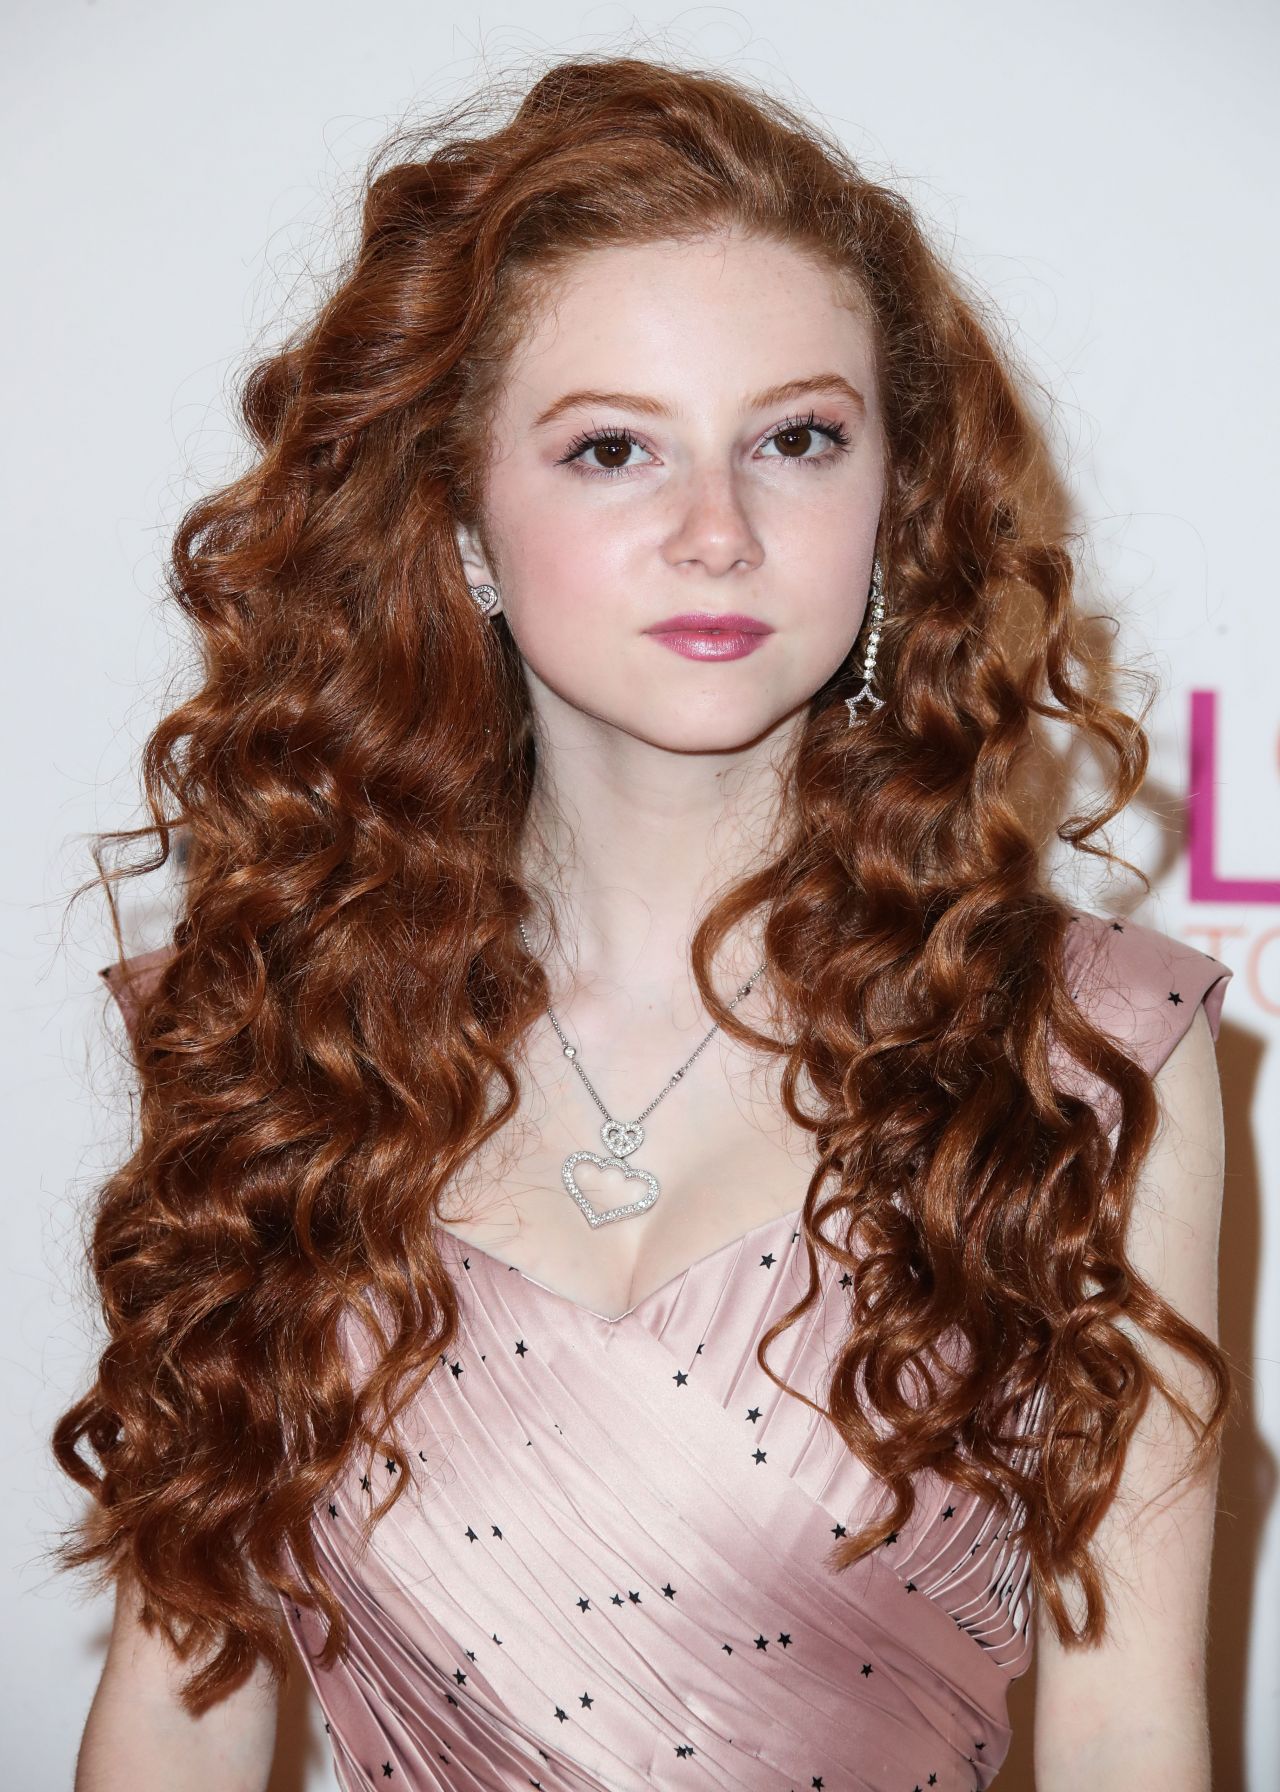 Francesca Capaldi – 2018 Race To Erase MS Gala in Beverly Hills